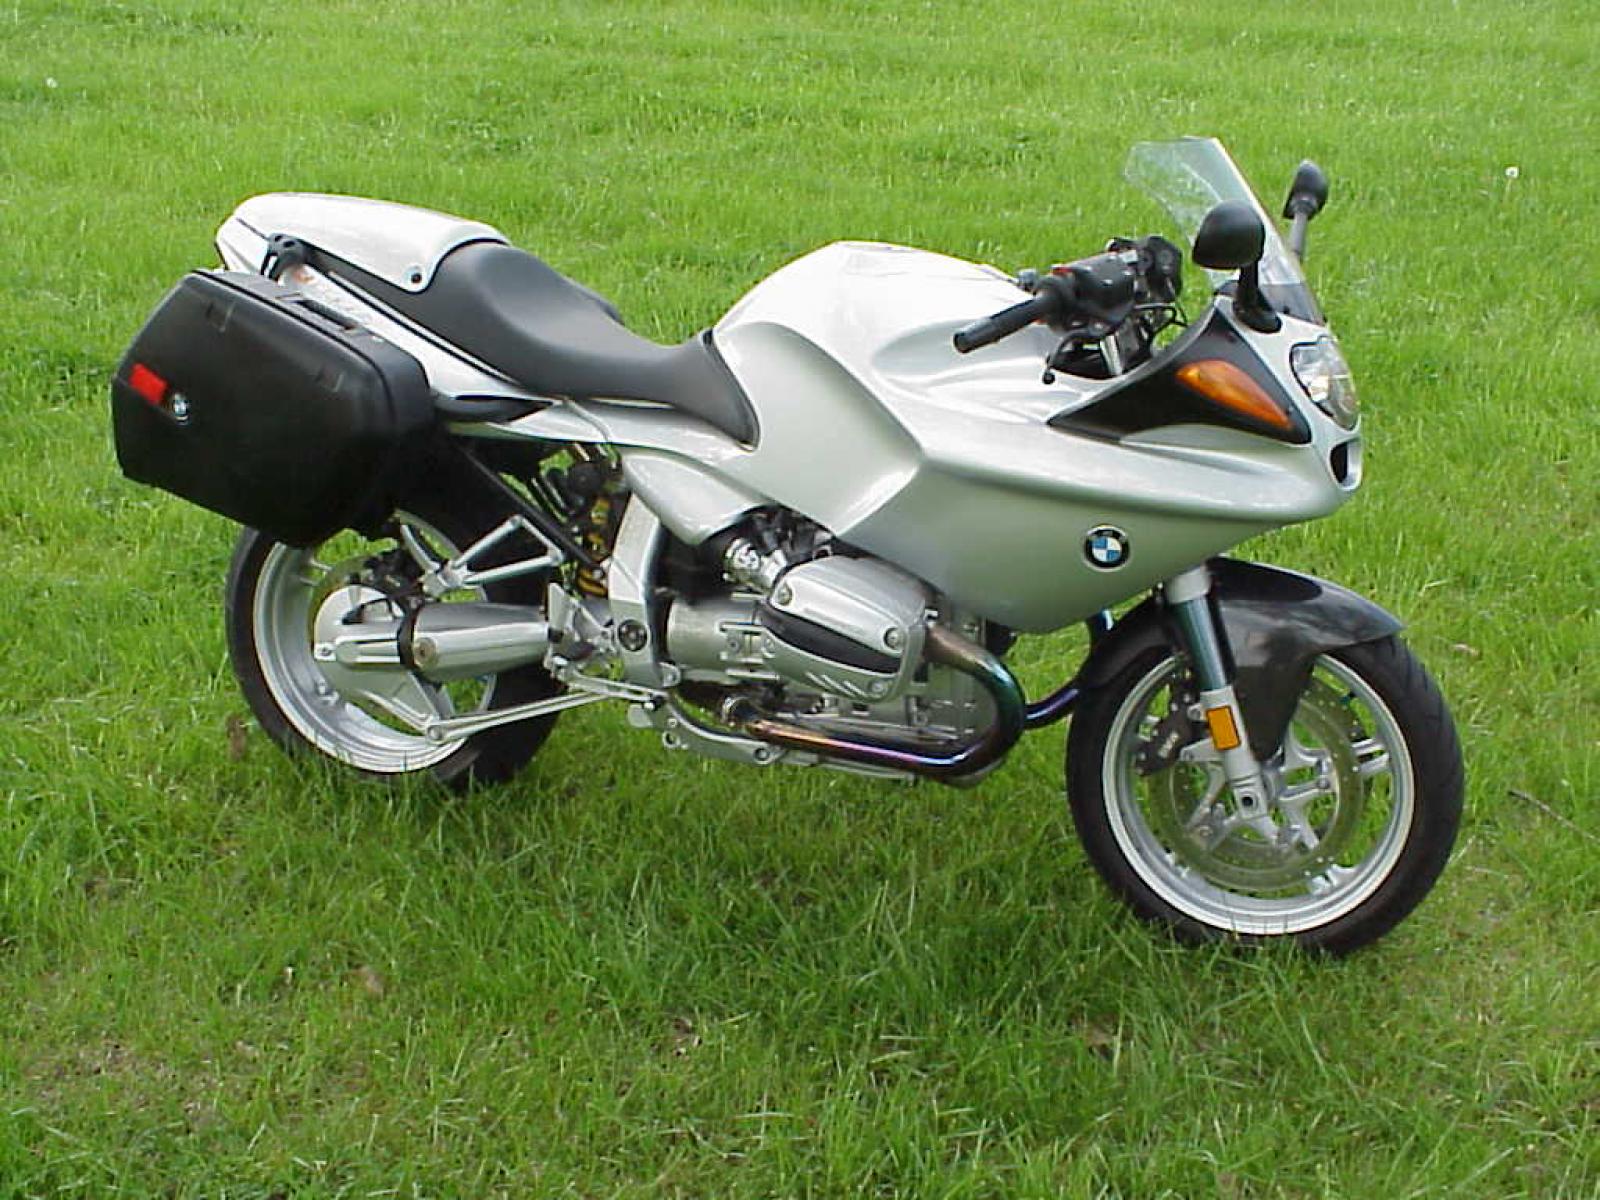 2002 Bmw r1100s seat height #5